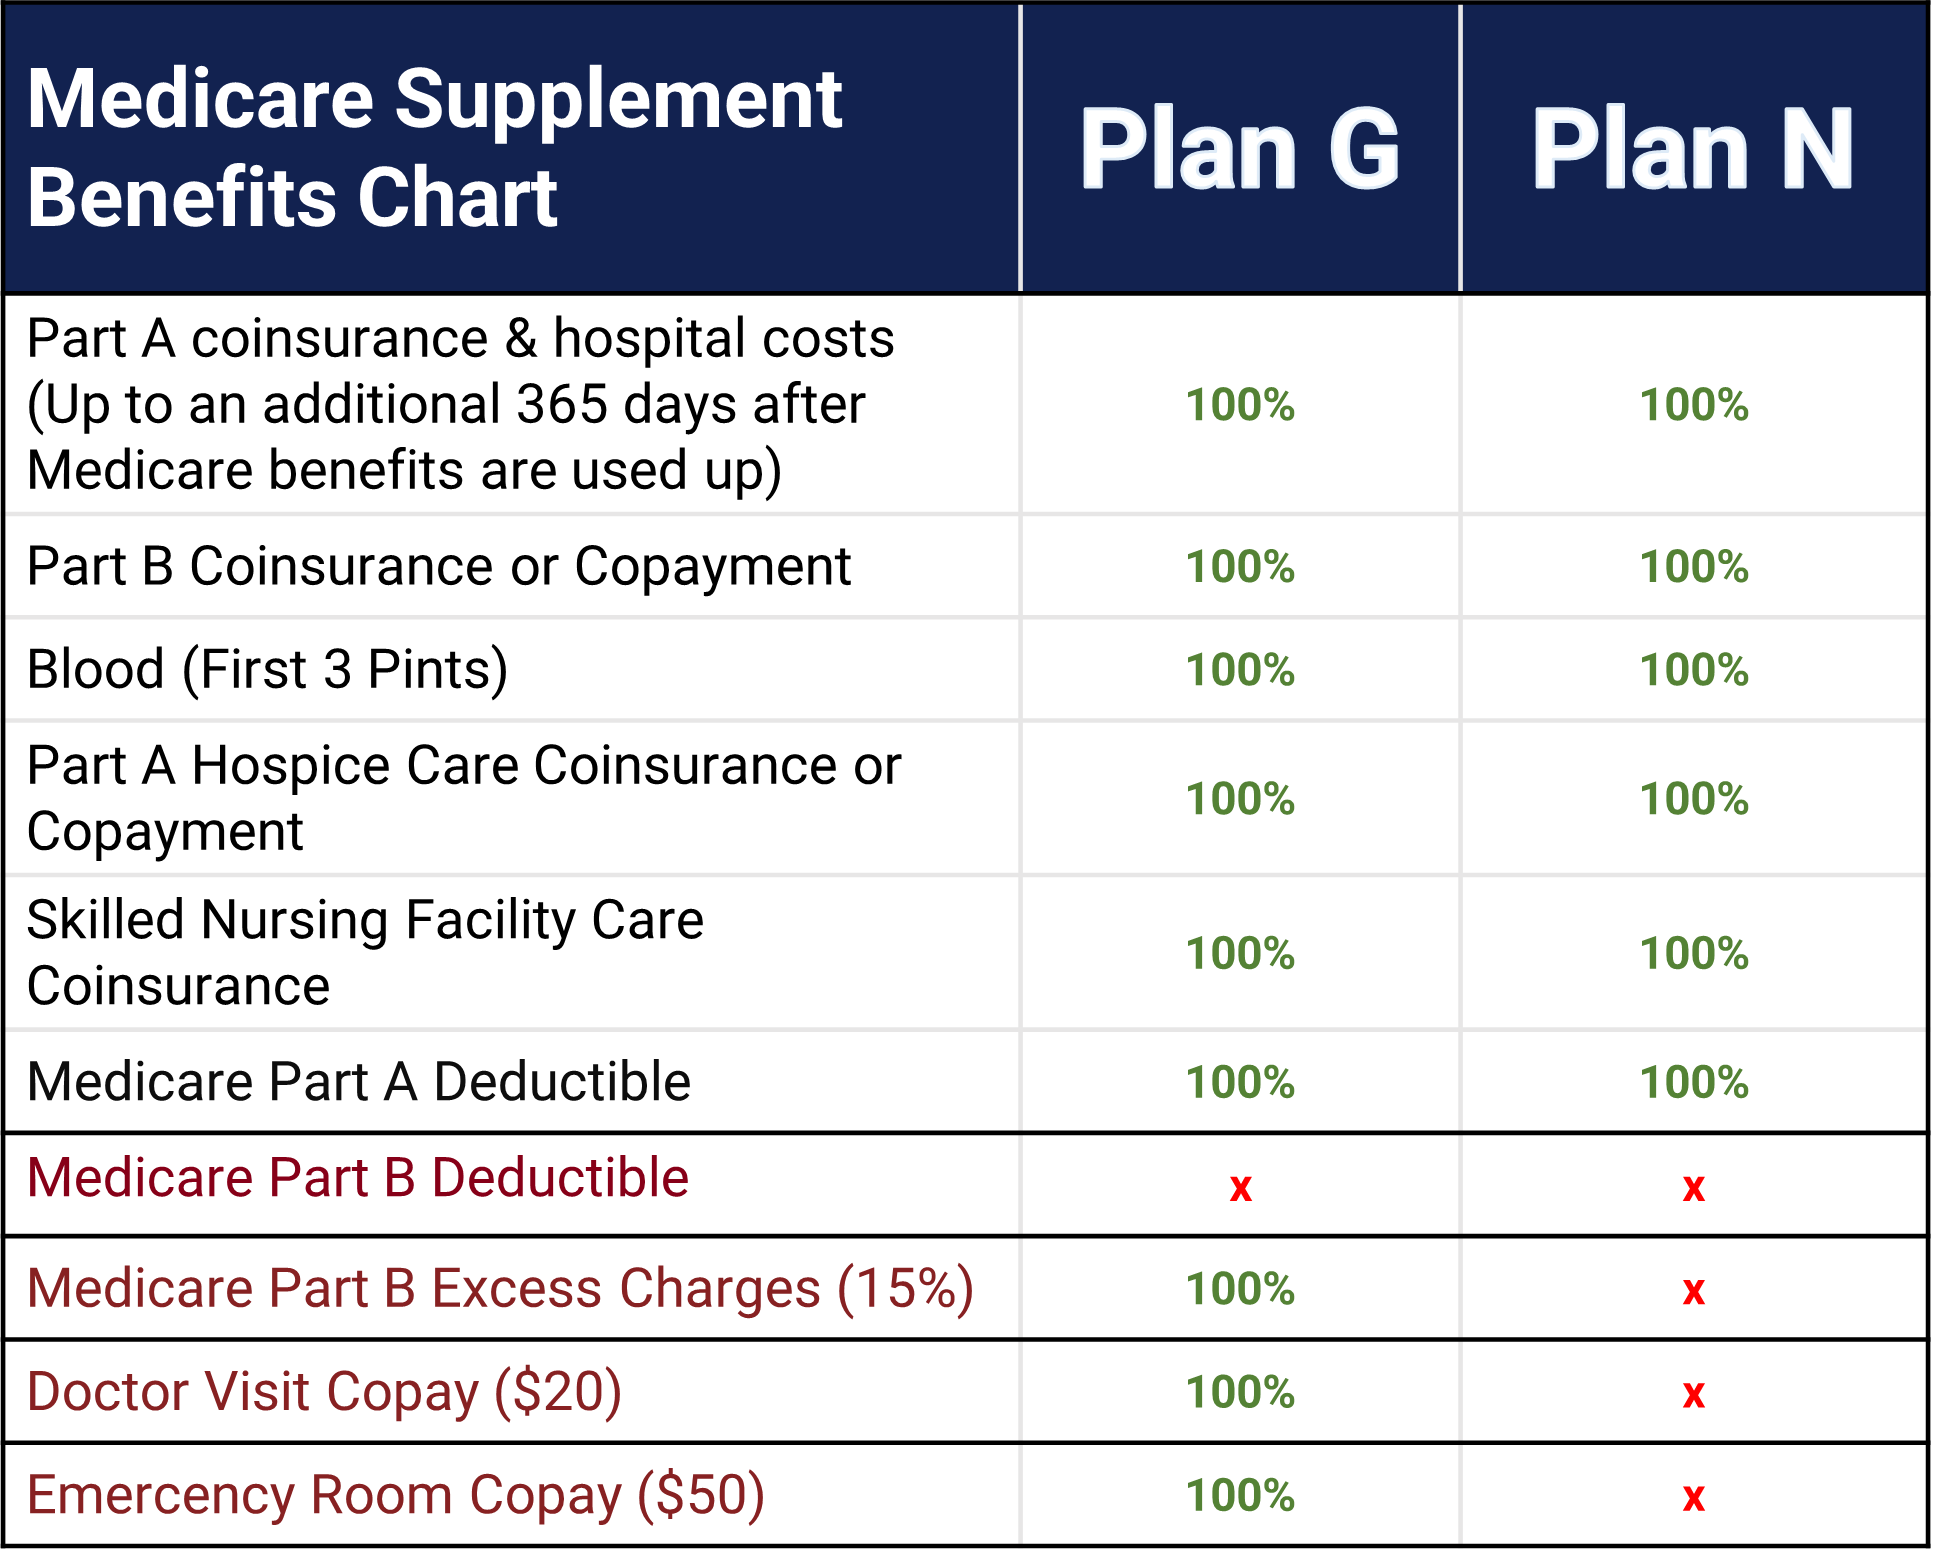 Compare the benefits of Plan G vs Plan N